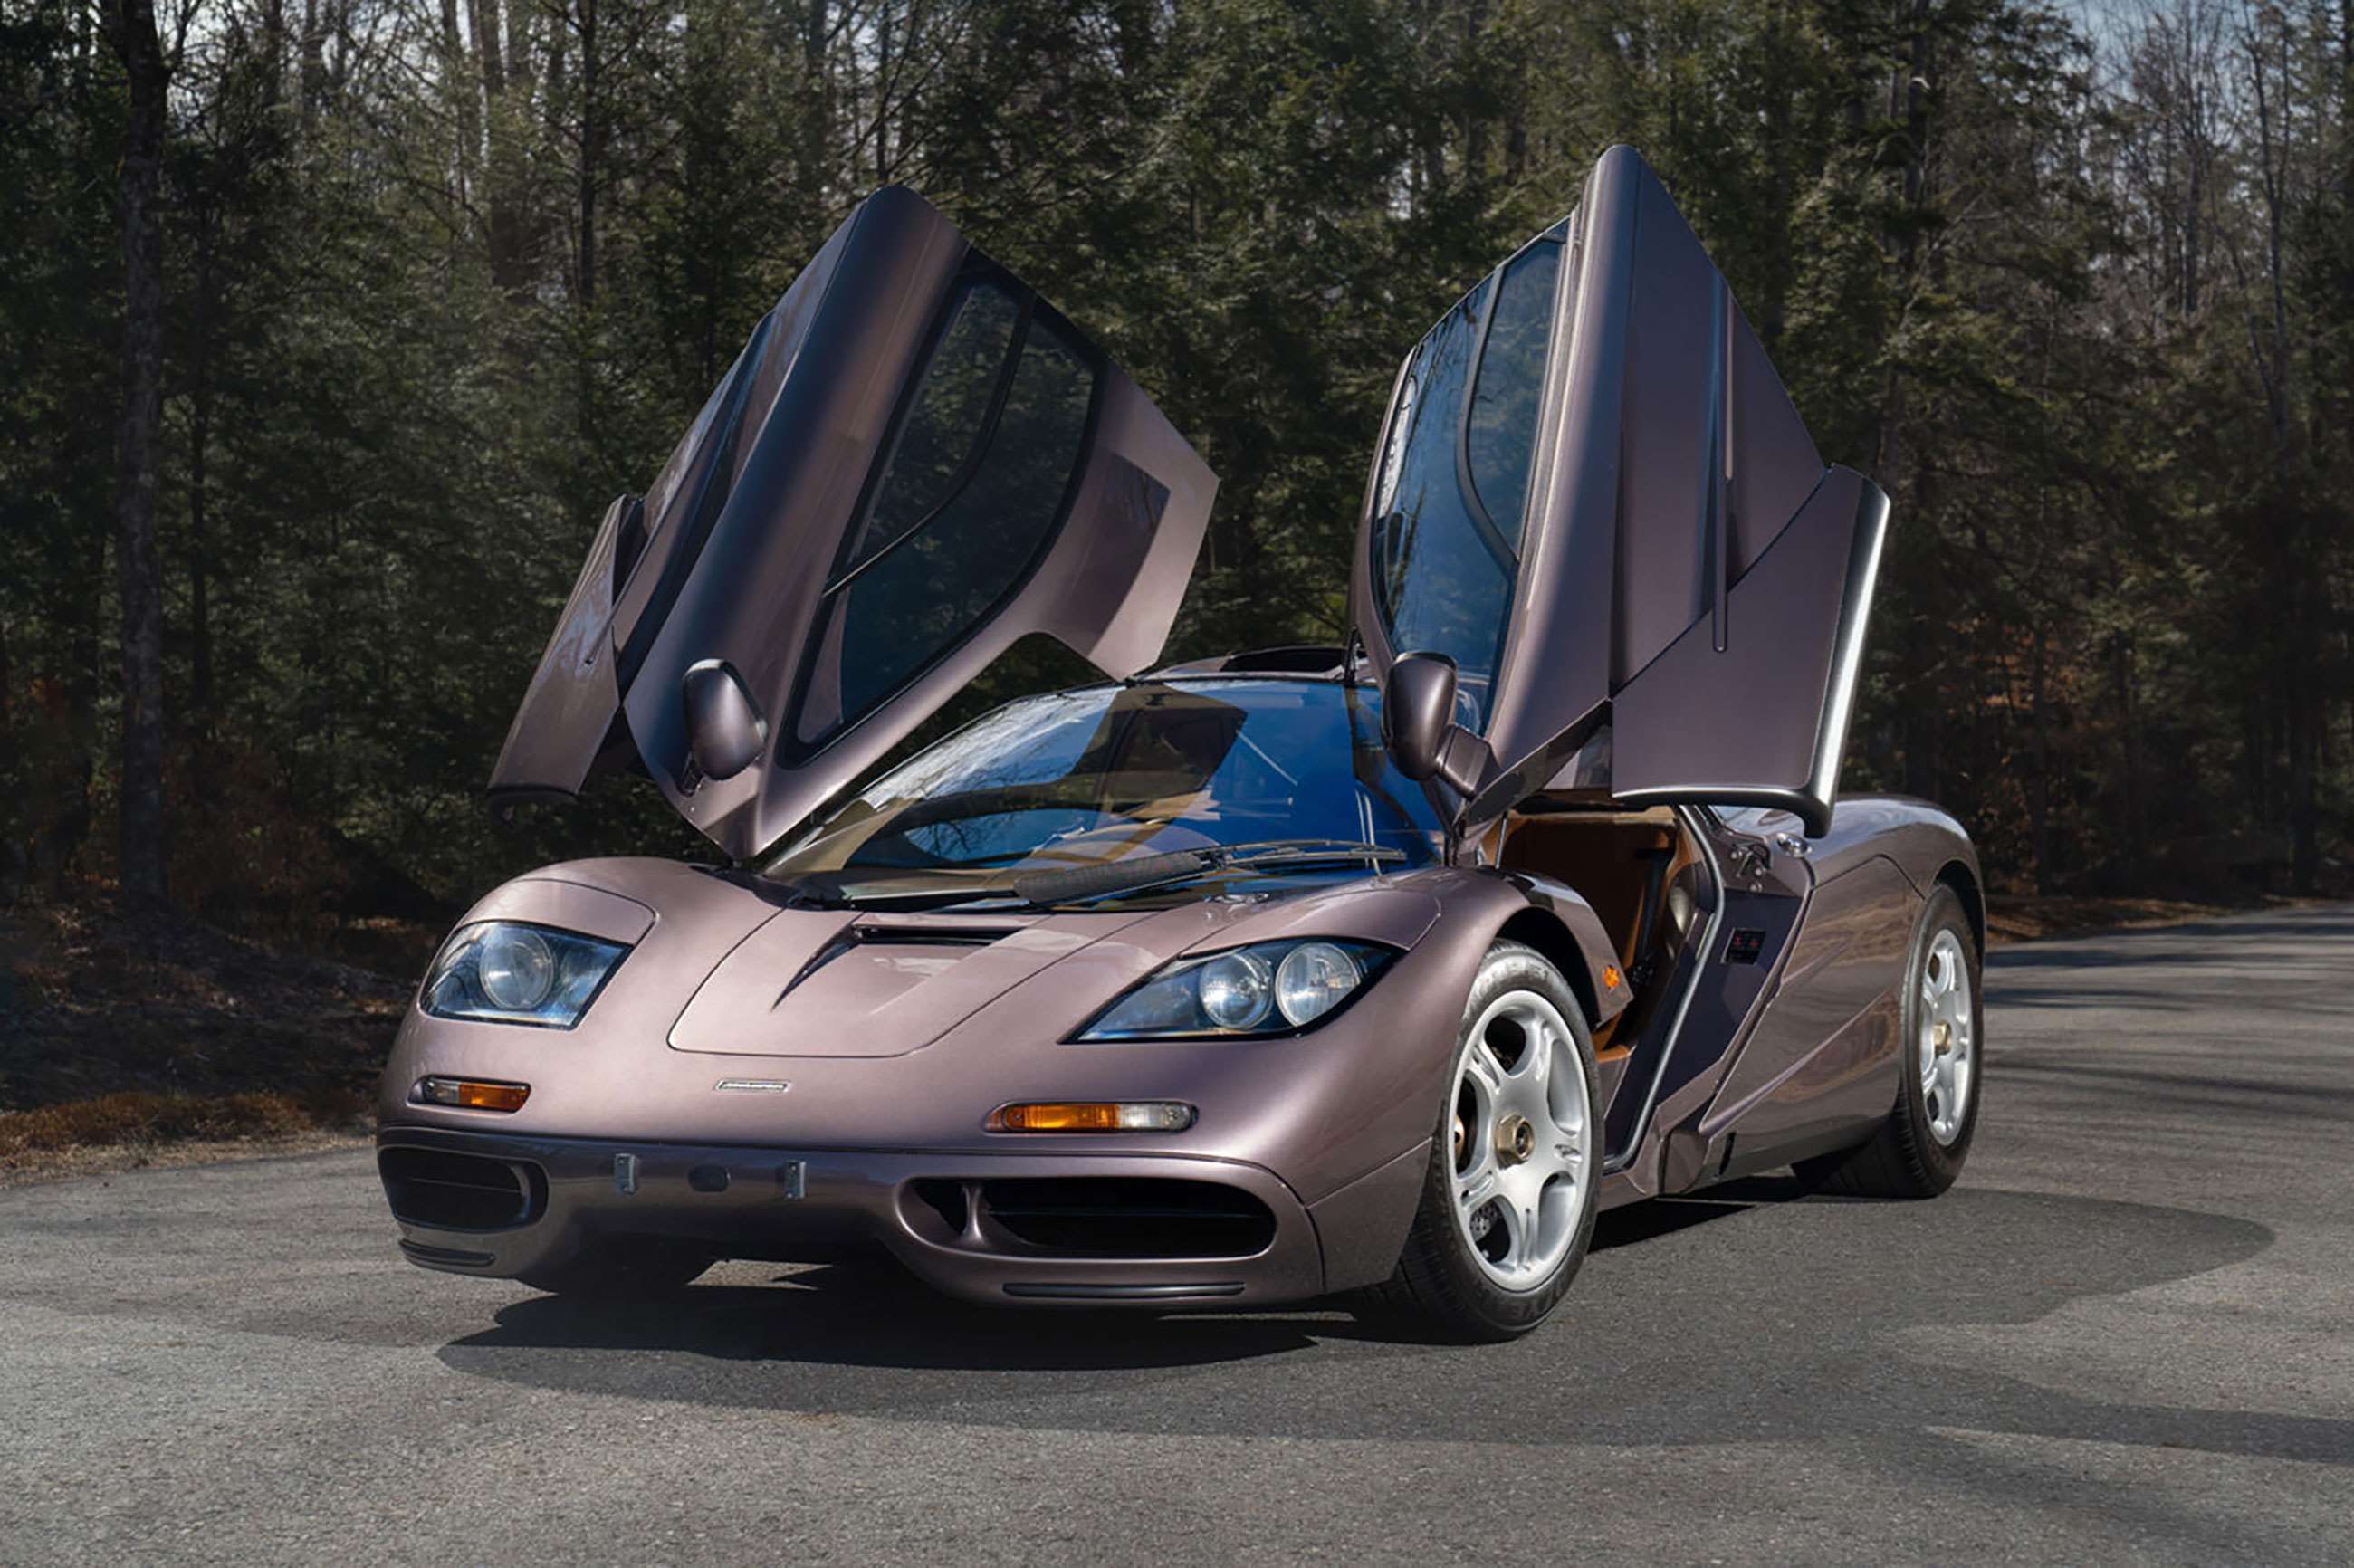 most-expensive-cars-sold-2021-mclaren-f1-gooding-main-05012022.jpg